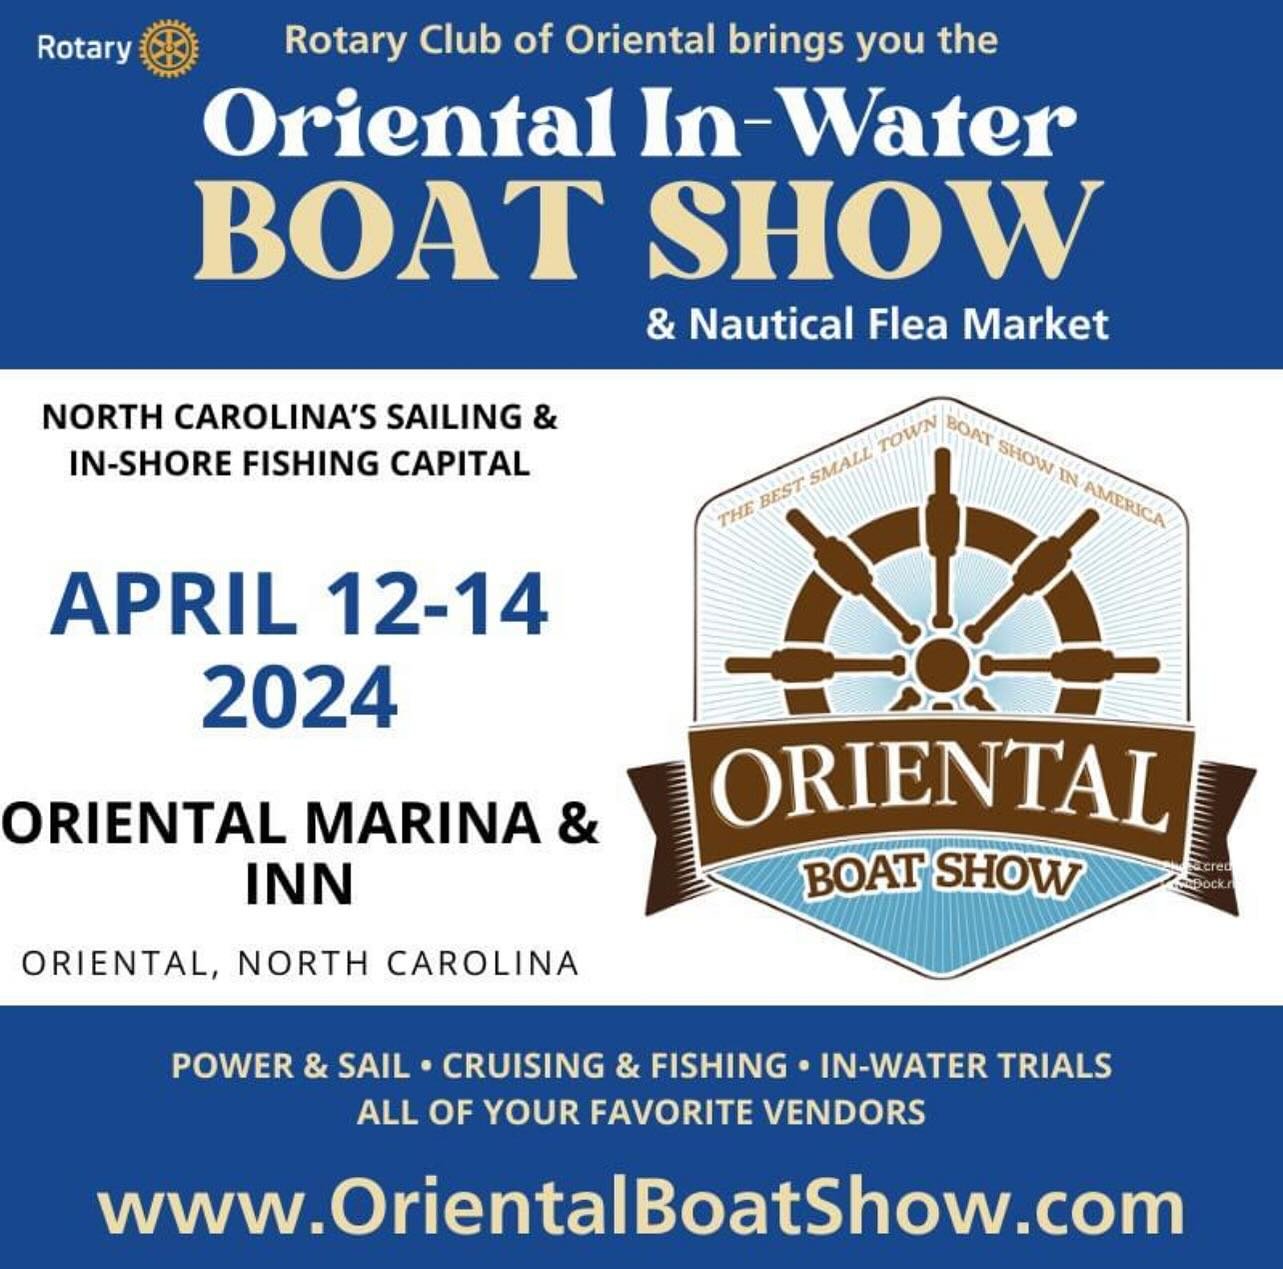 Taking a little break from all the pre planting  work at the farm to enjoy some fun and friendship at the Oriental Boat Show this weekend.
⚓️⚓️⚓️
We&rsquo;ll be hanging out with our buds at Nautical Wheelers at their flagship shop in beautiful Orient